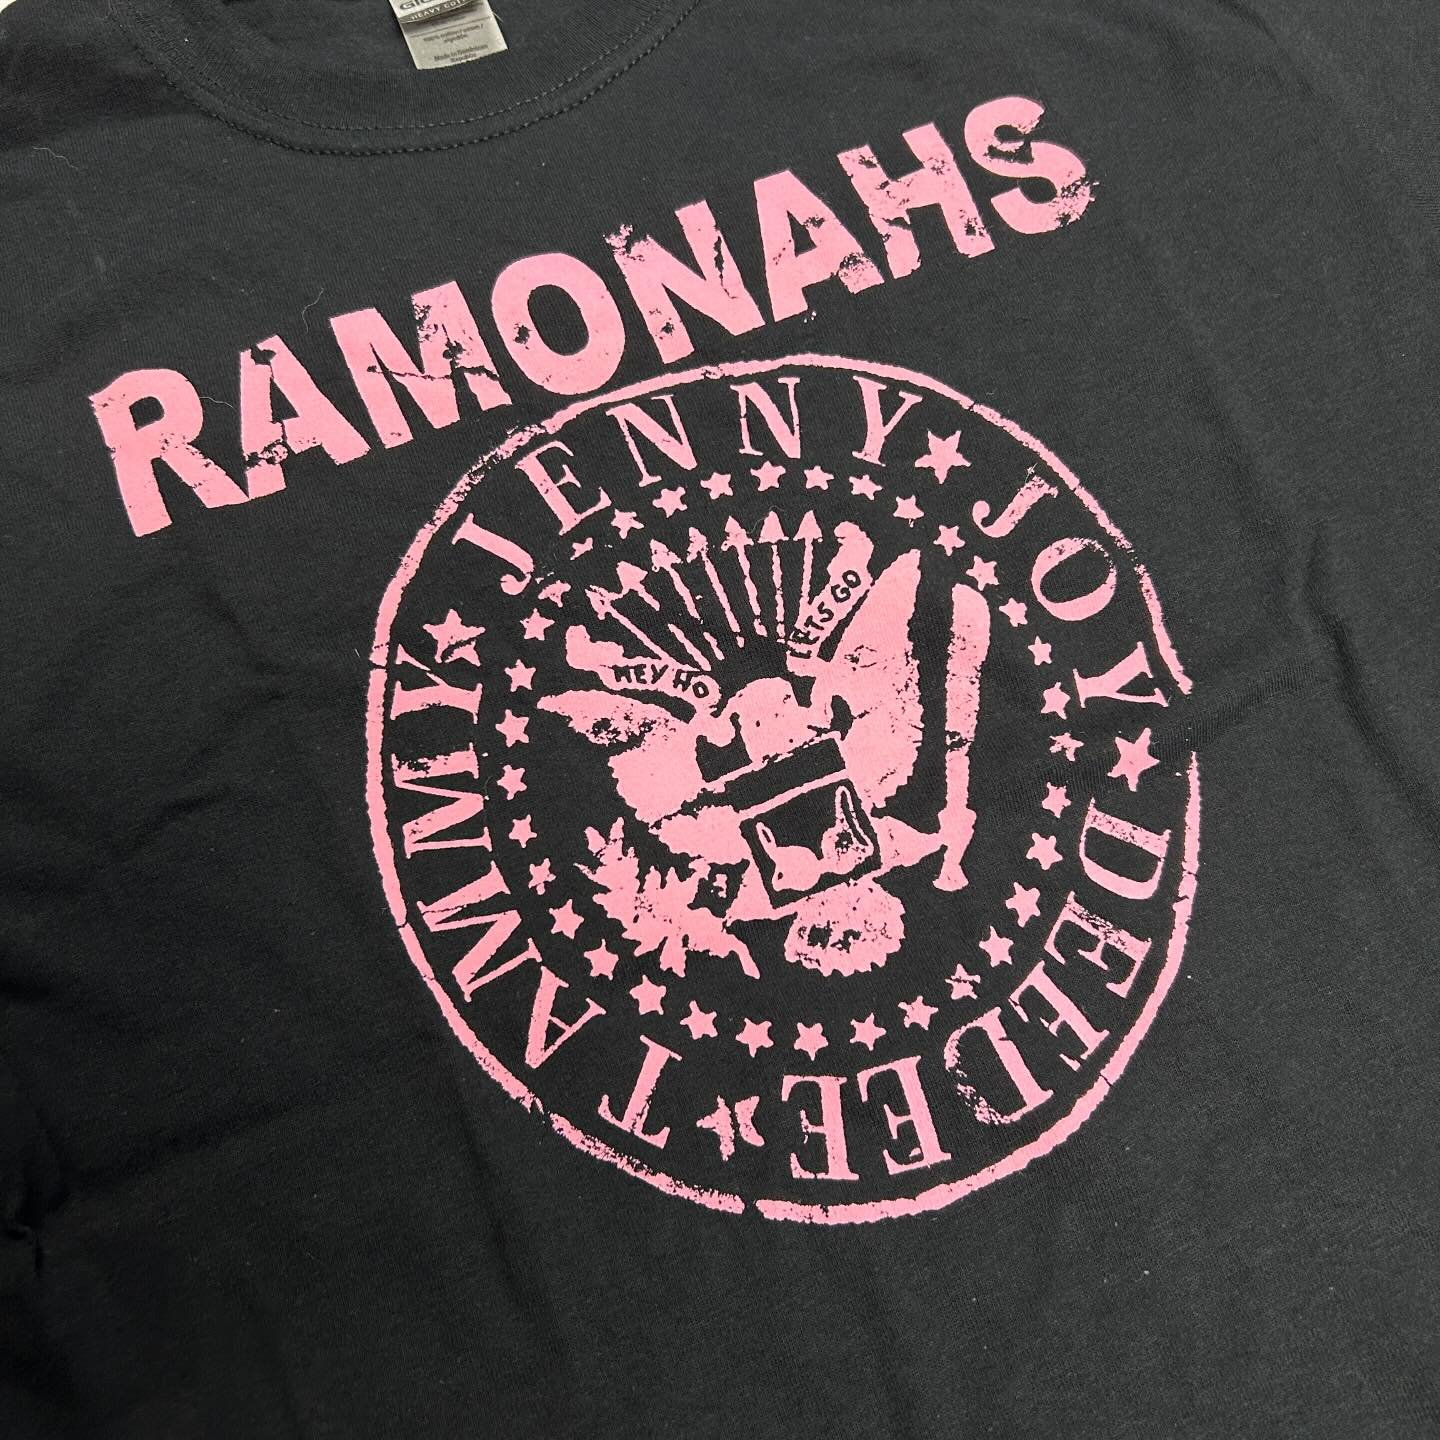 Ramonahs tees are now available at the Anchor online store!
🔸FREE SHIPPING IN US (Orders of $35 or more)
🔸Only available online at Anchor Screen Printing (.com)
🔸Link to store in profile!

#ramonescoverband 
#ramonahs 
#oliverpecker 
#G&Oslash;&Os